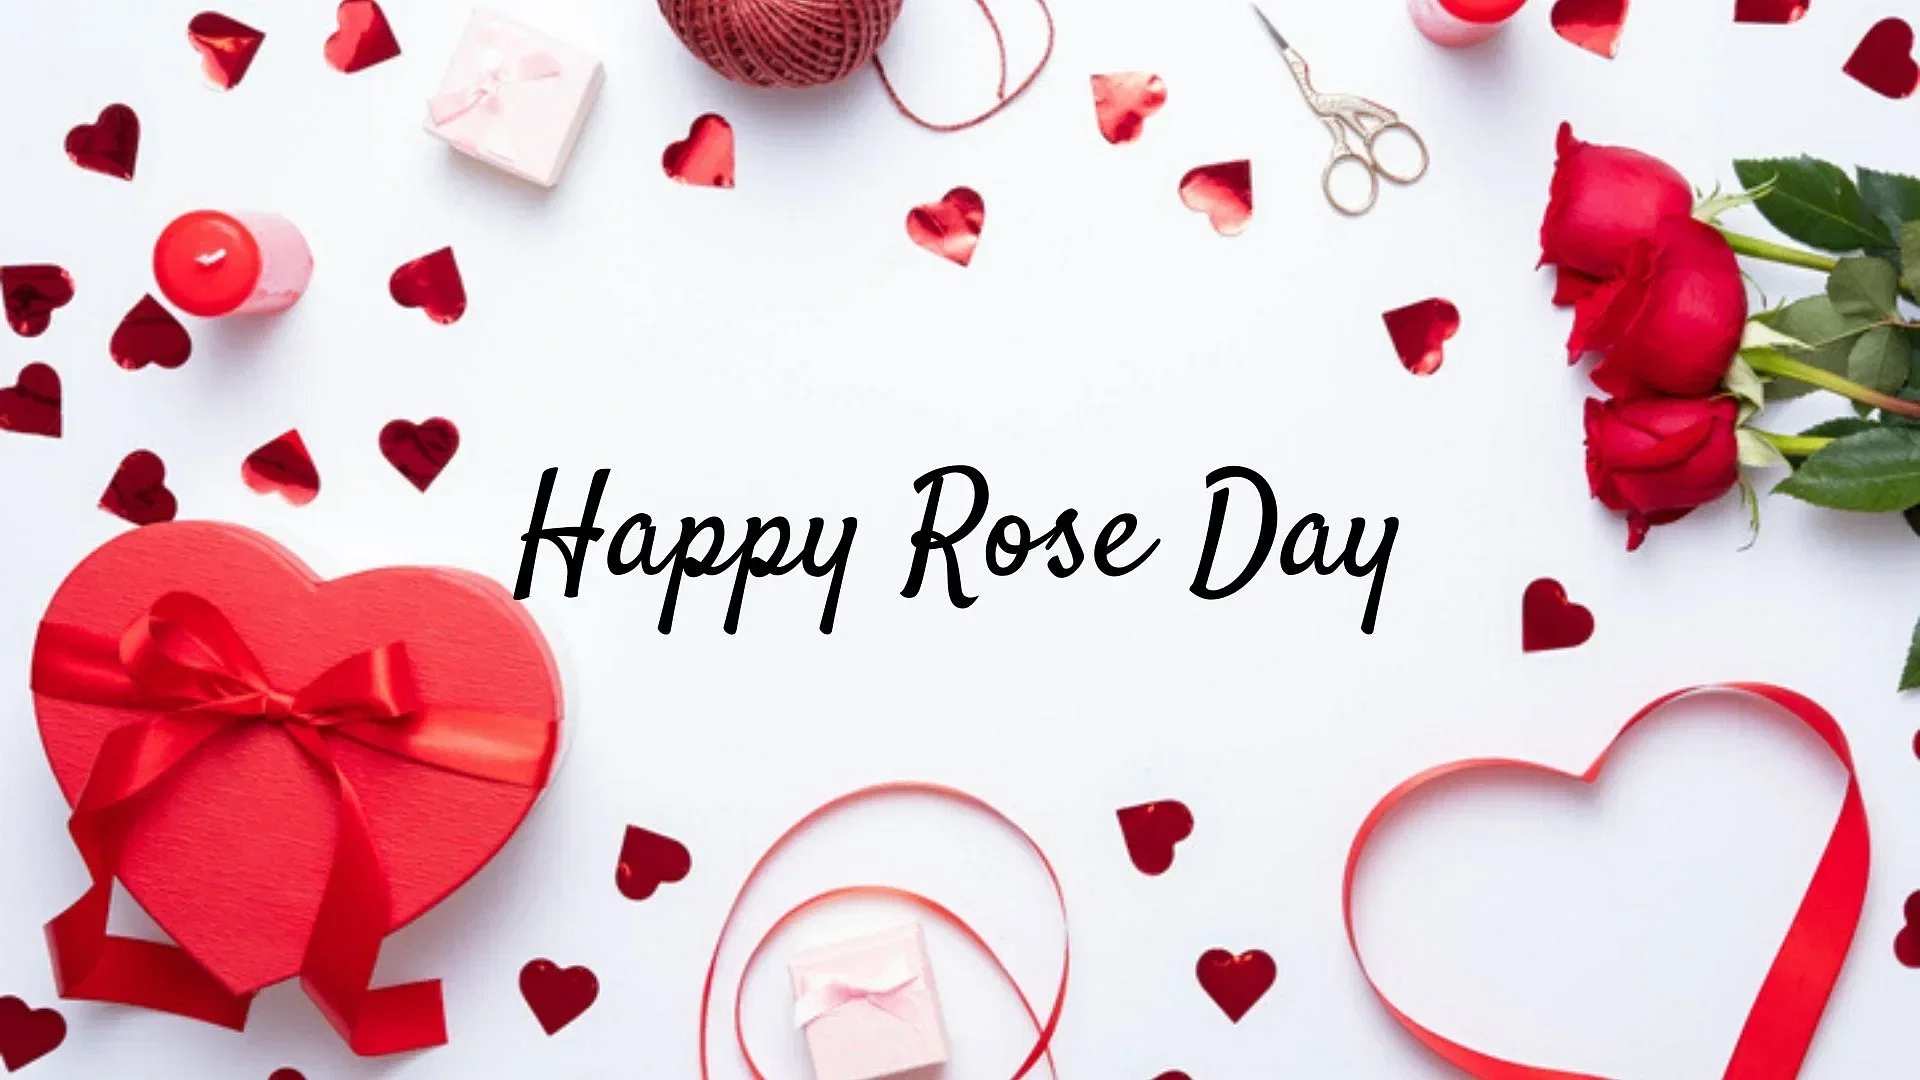 Rose Day Wishes, Quotes, and Messages for Your Special Someone